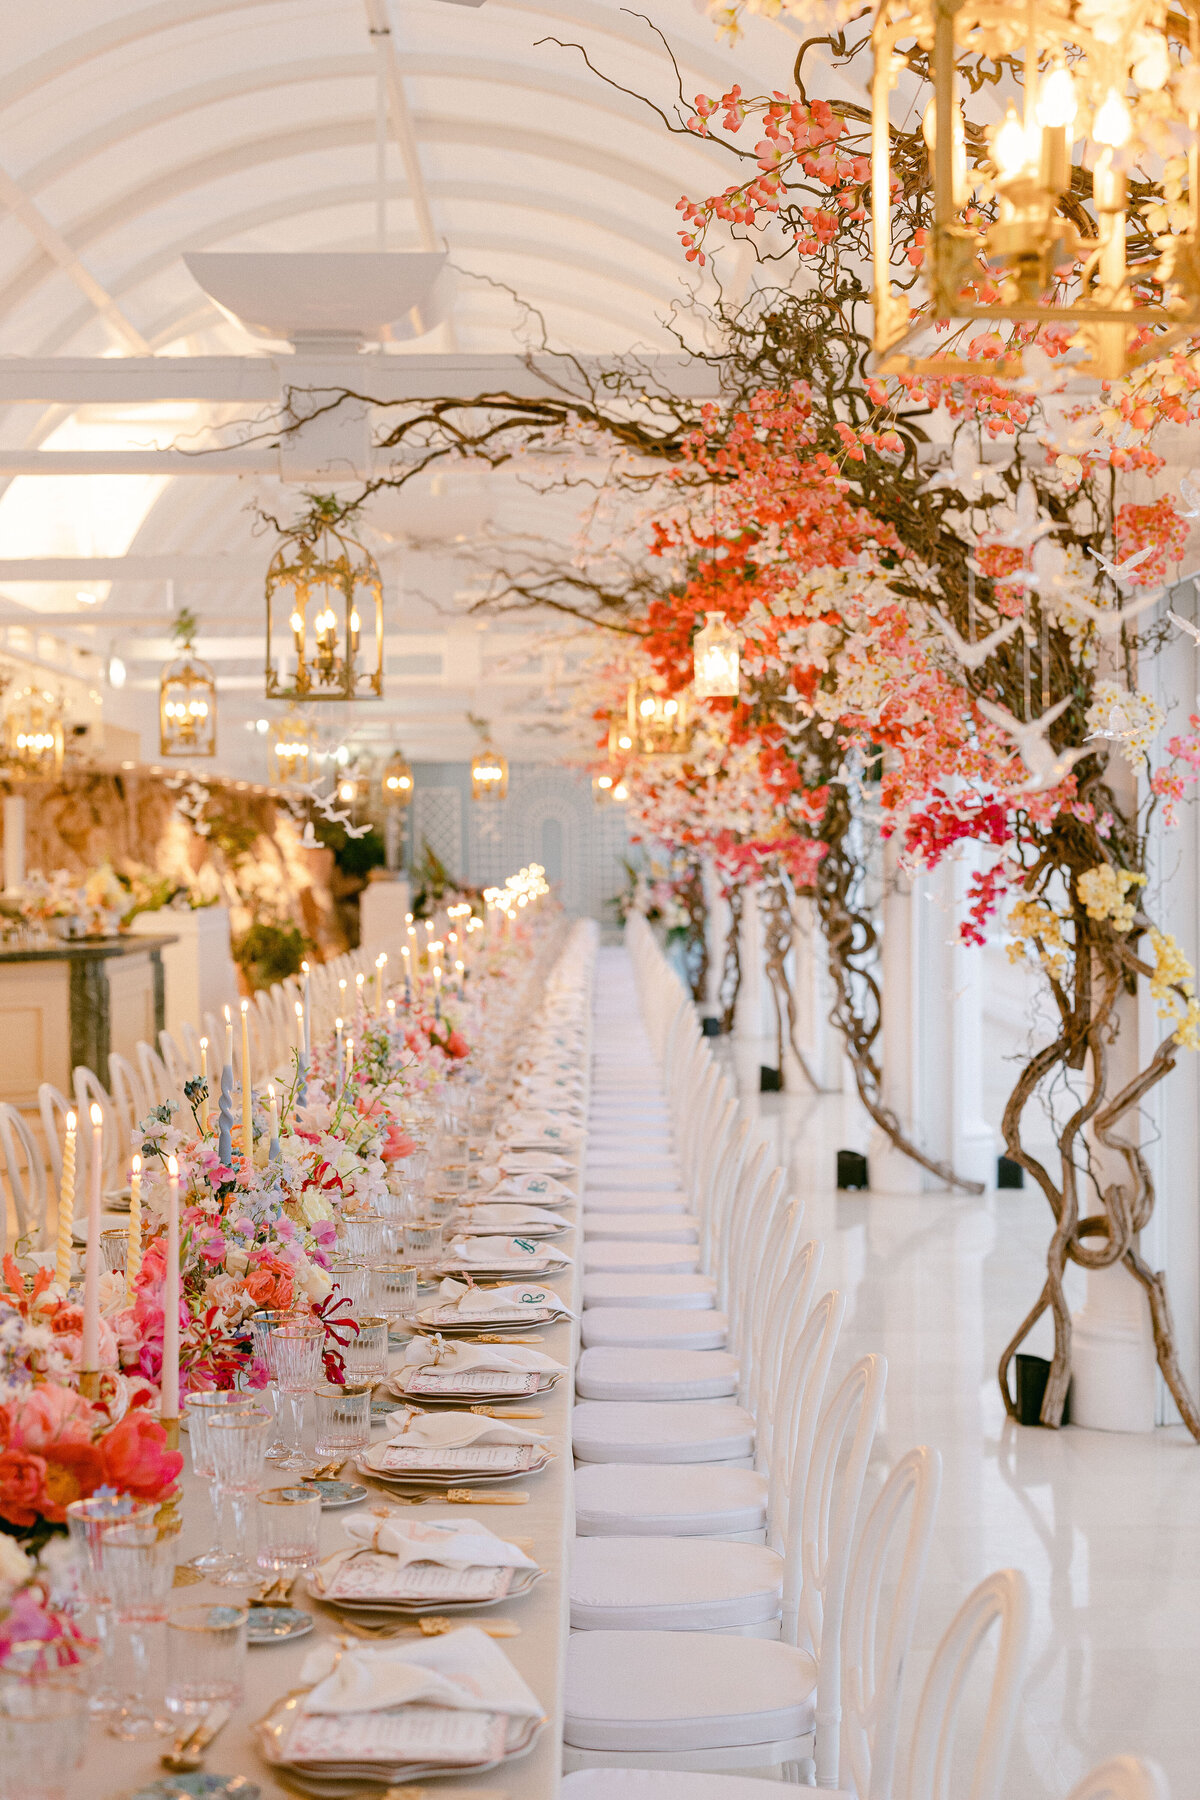 Floral decor and dinner tablescape